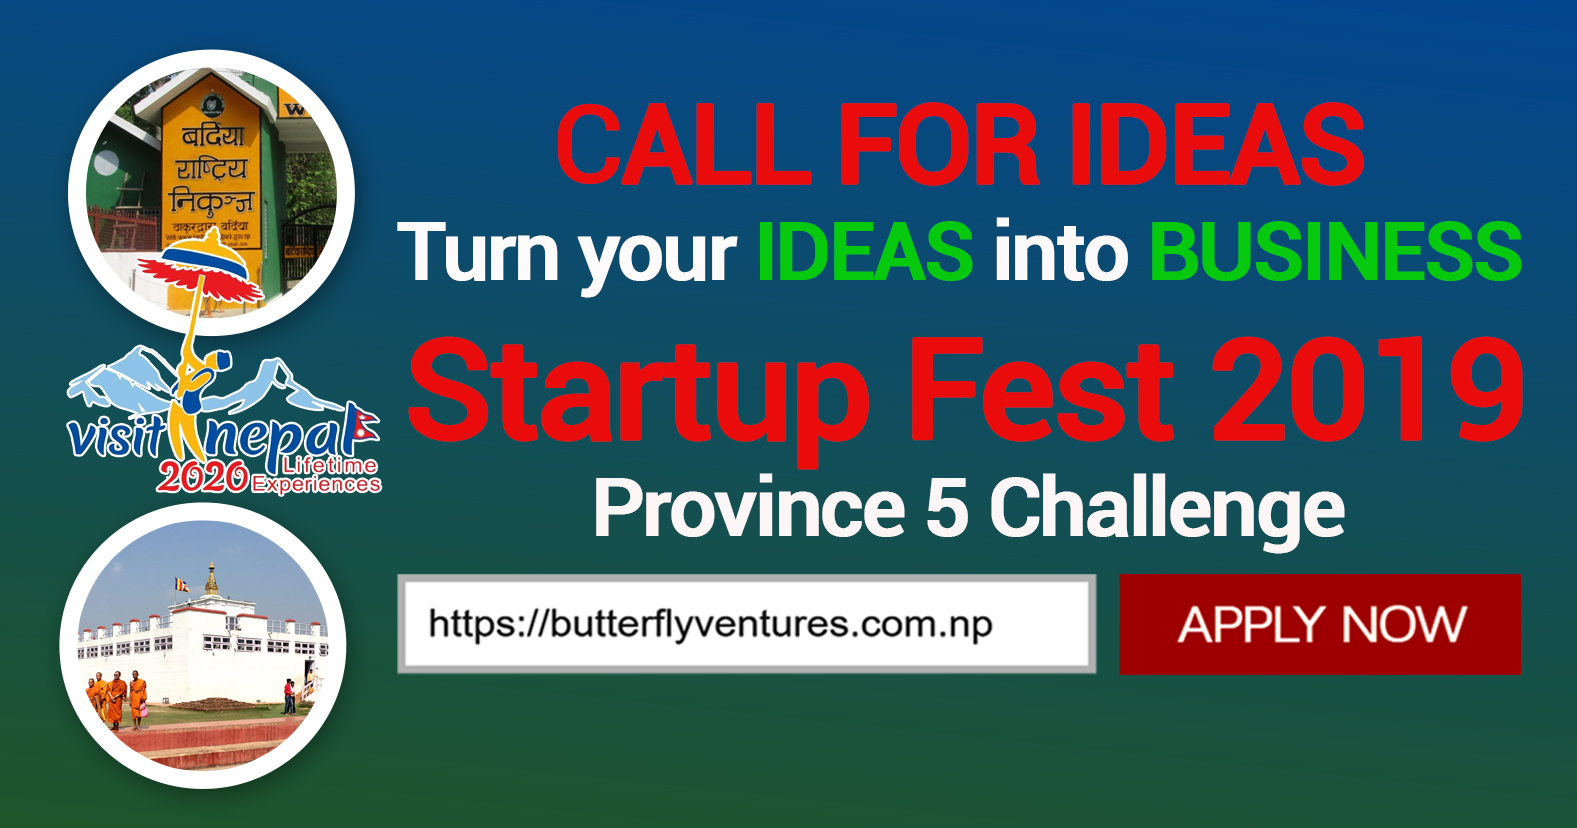 Call for Idea submission : Province 5 Startup Challenge